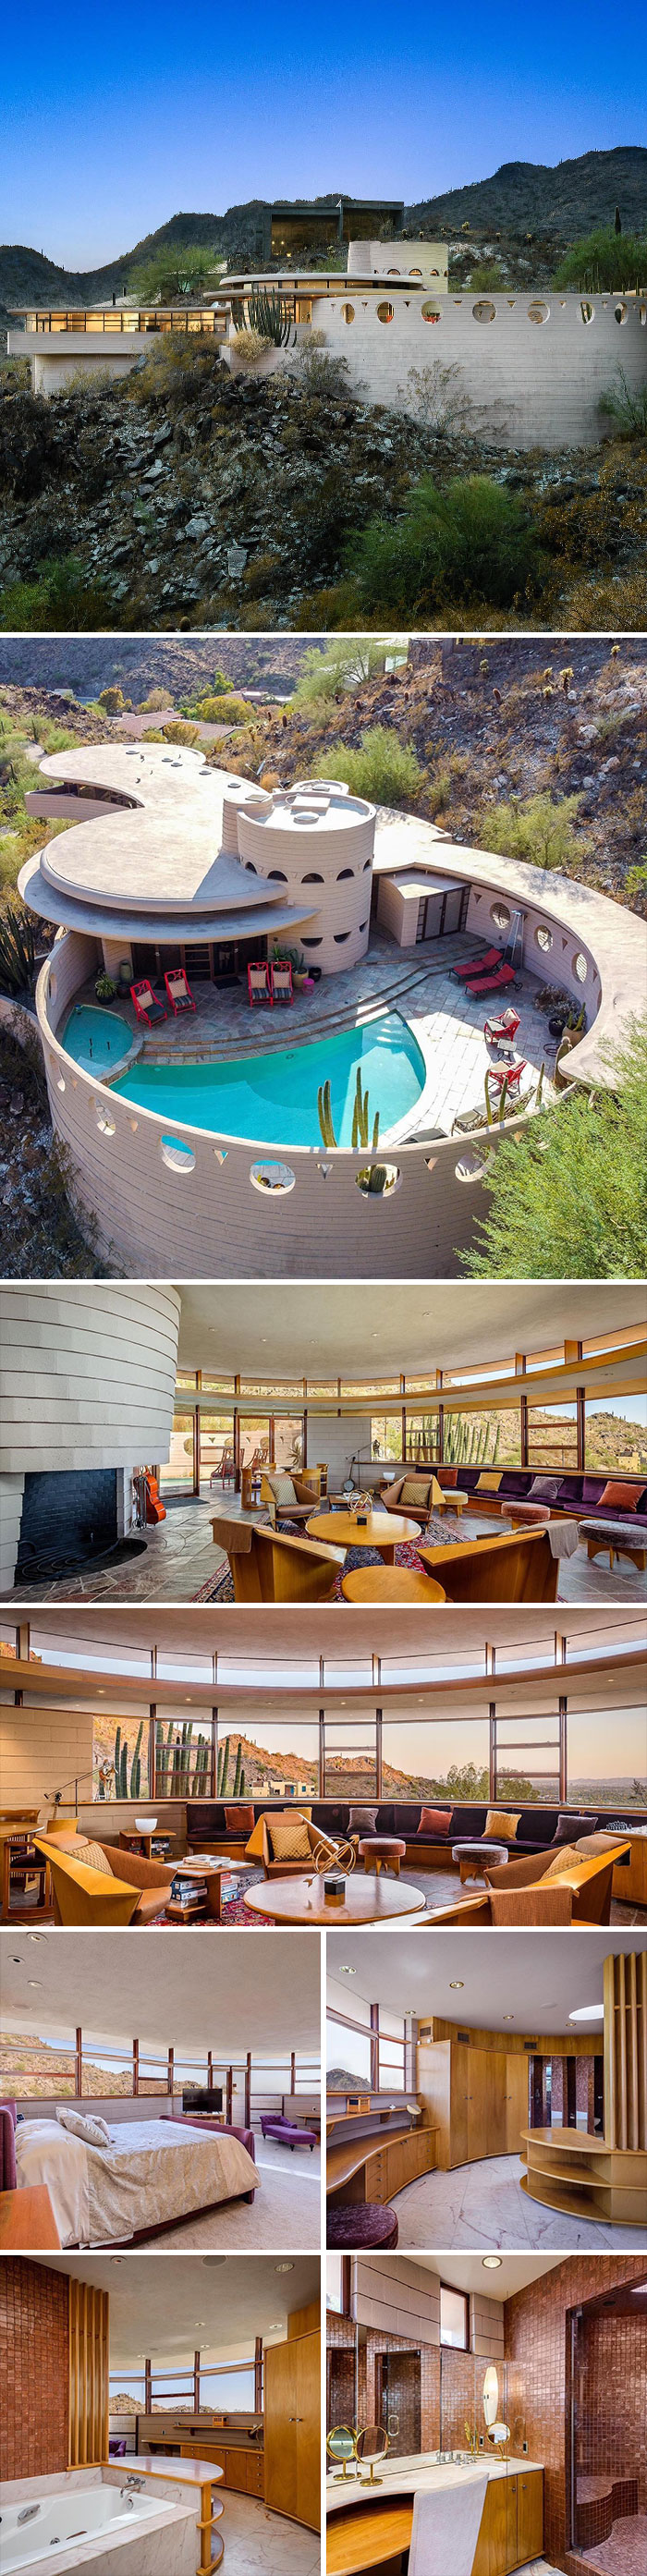 Frank Lloyd Wright’s Last Designed Home, Also Known As The “Circular Sun House” $8,950,000